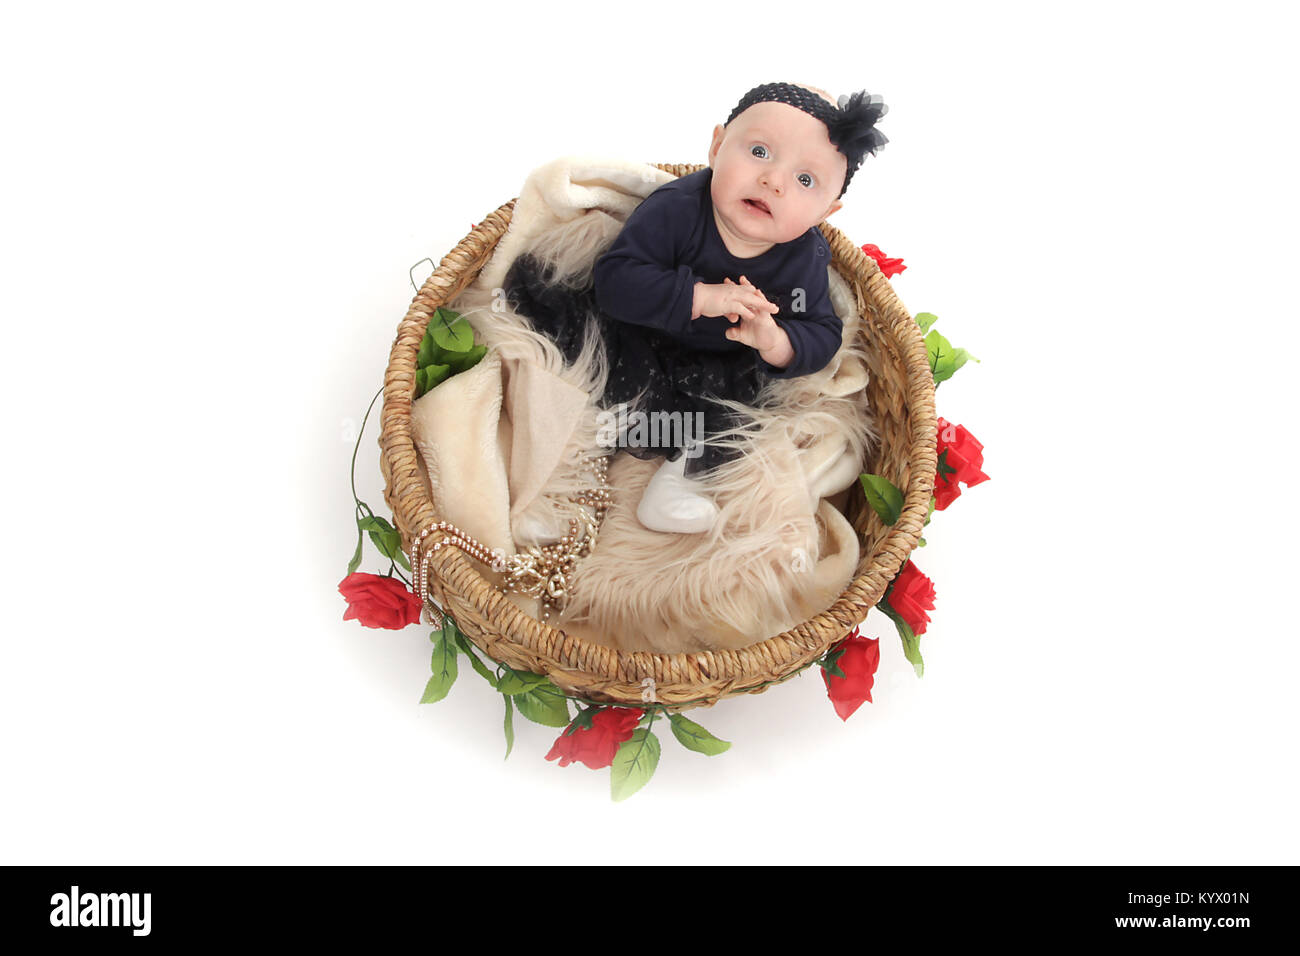 5 month old baby girl with in black dress sitting in a basket Stock Photo